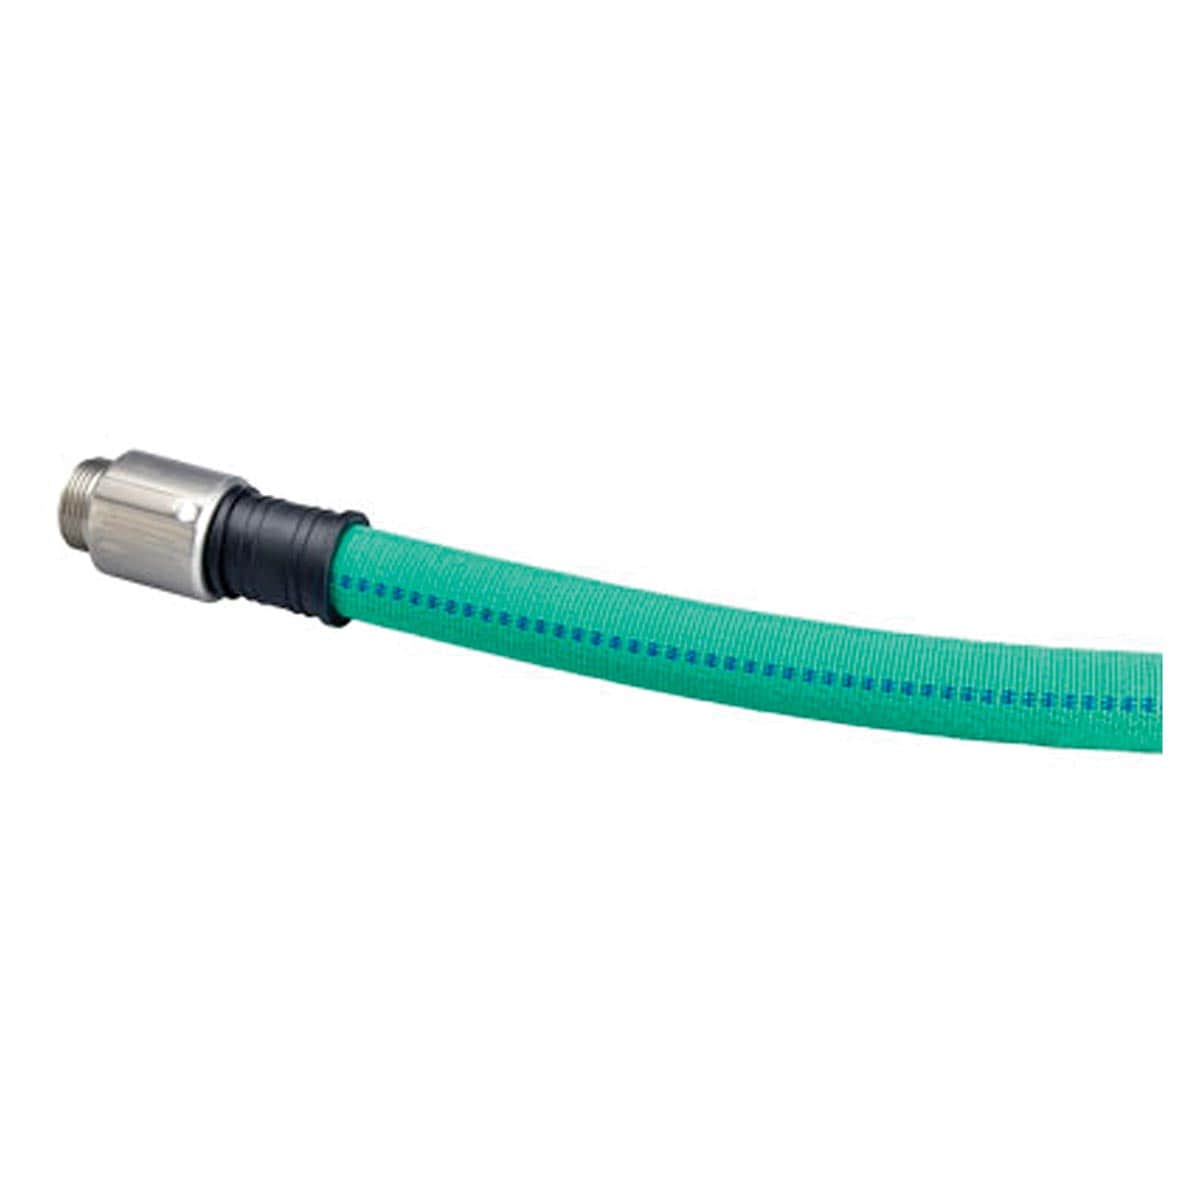 Underhill Featherweight UltraMax Hose, 1 in. x 100 ft.